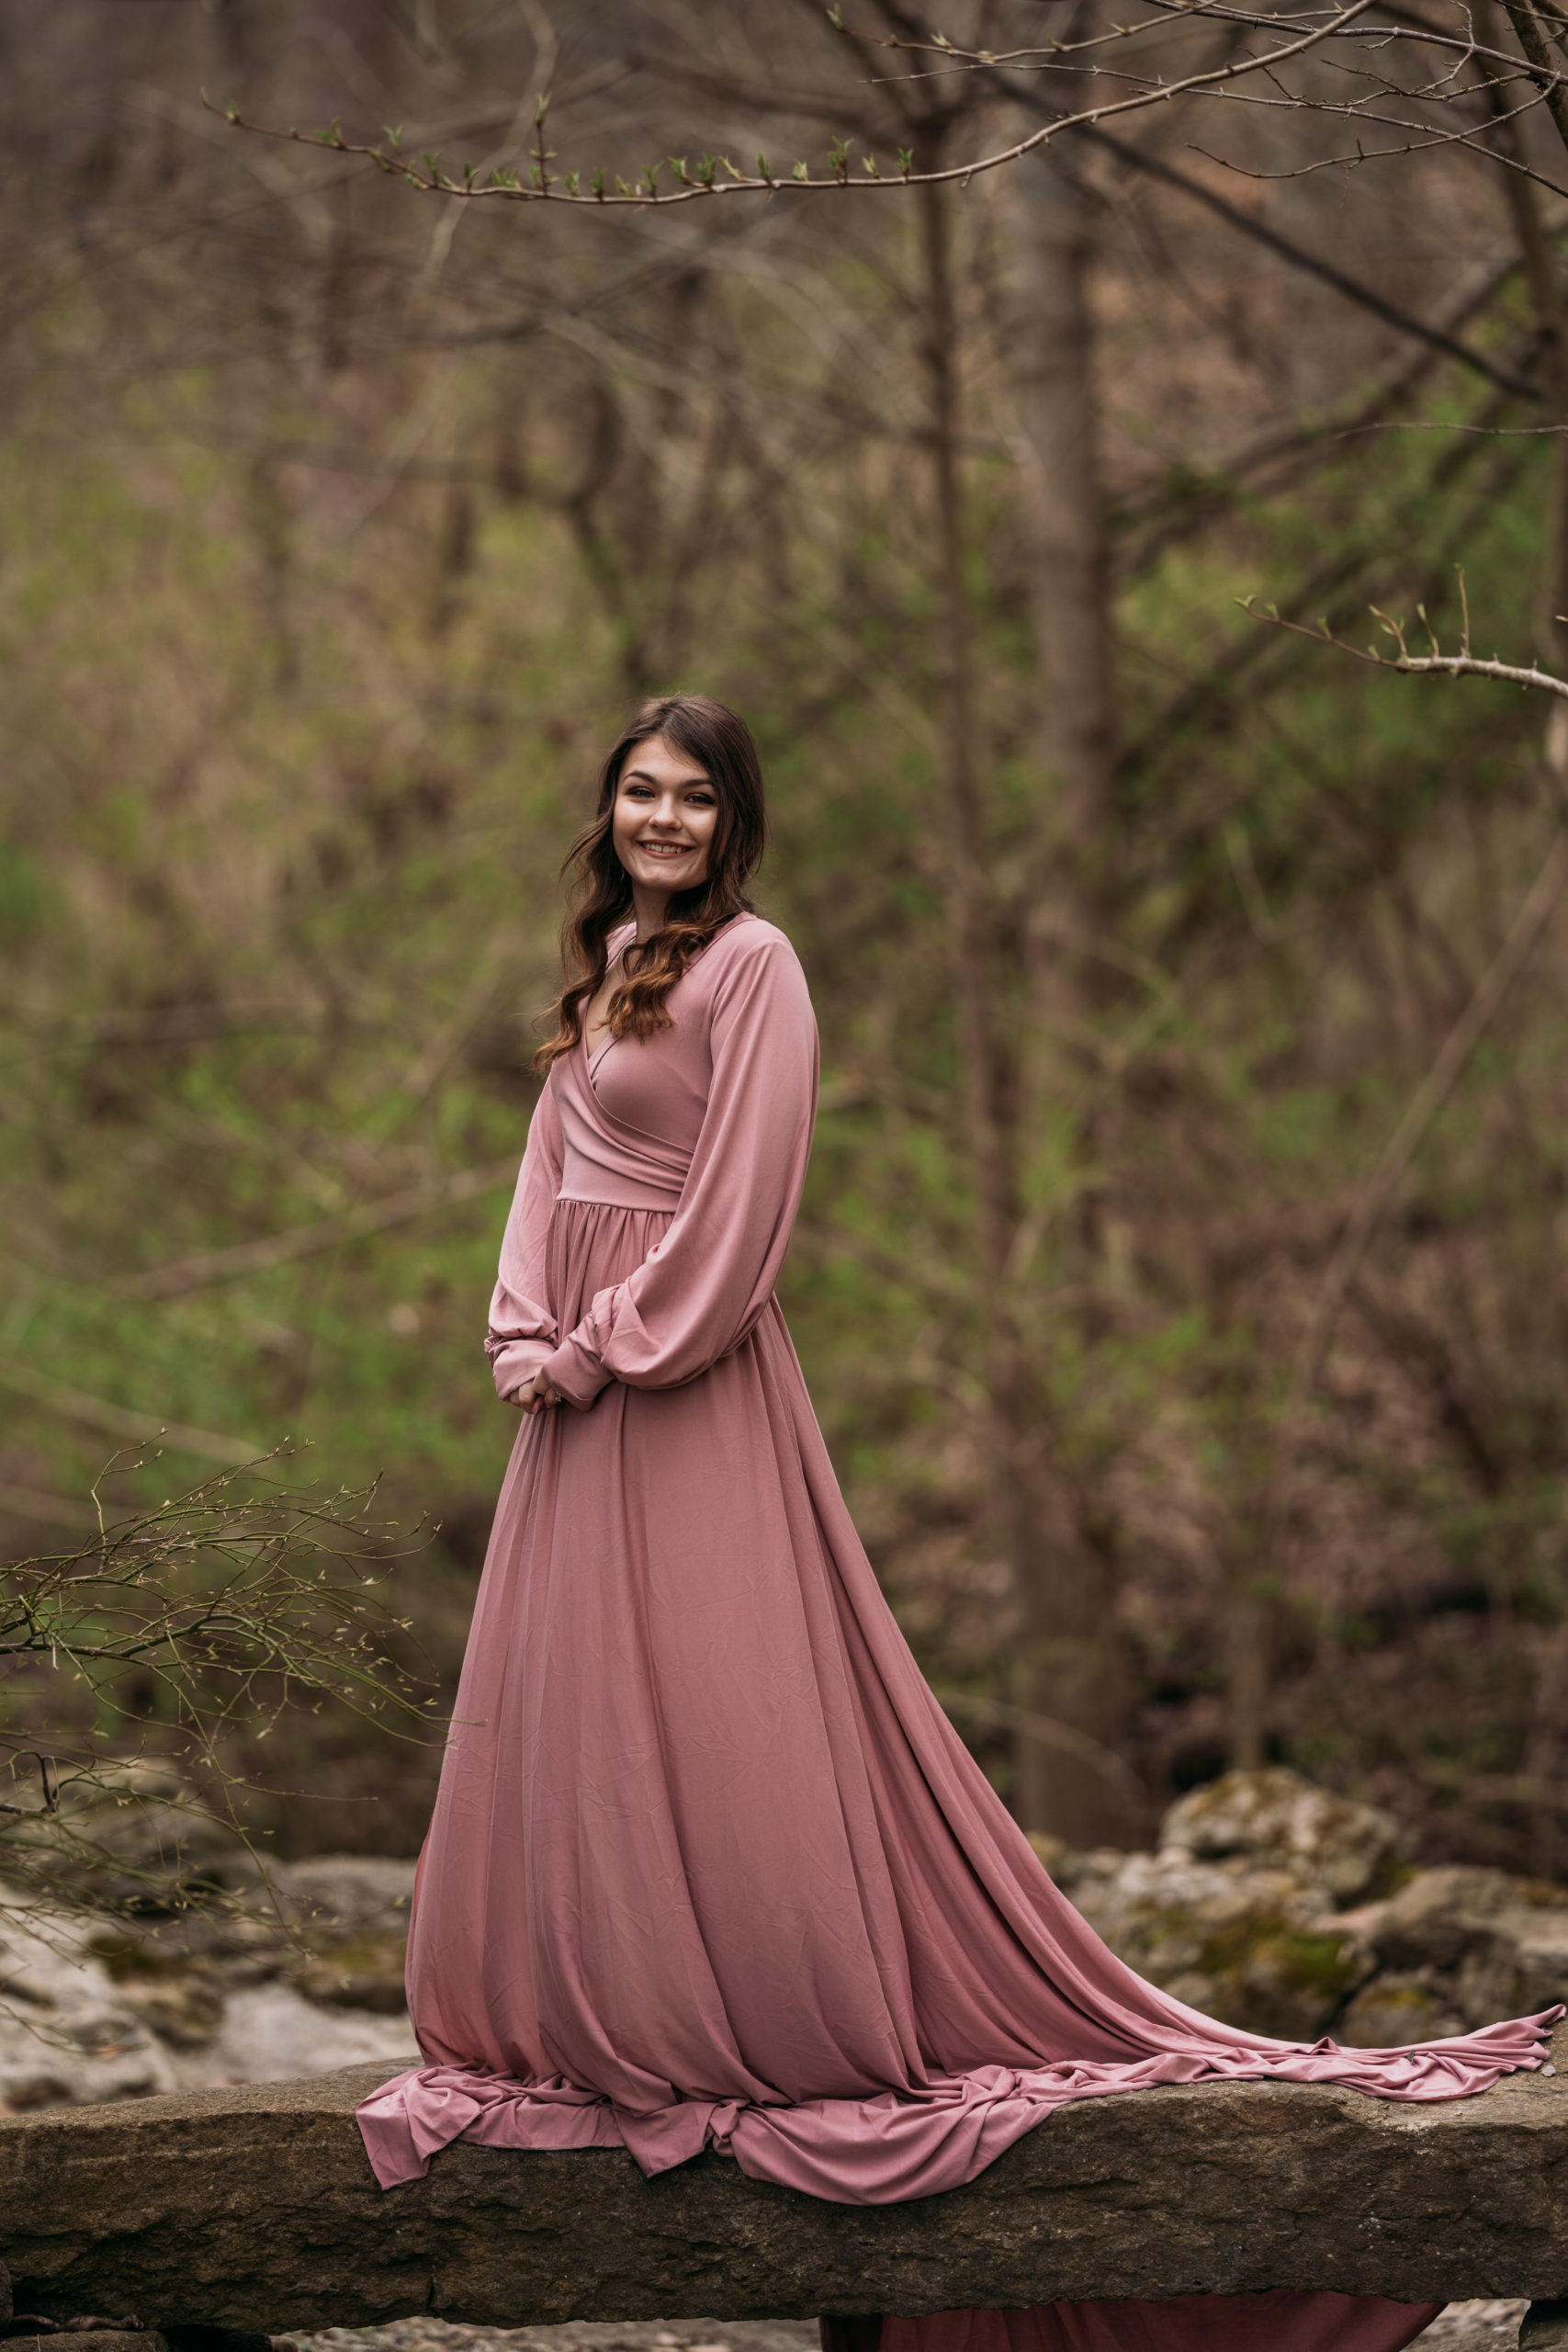 Loveland Castle Senior Session. Flowy dusty rose gown in the woods.